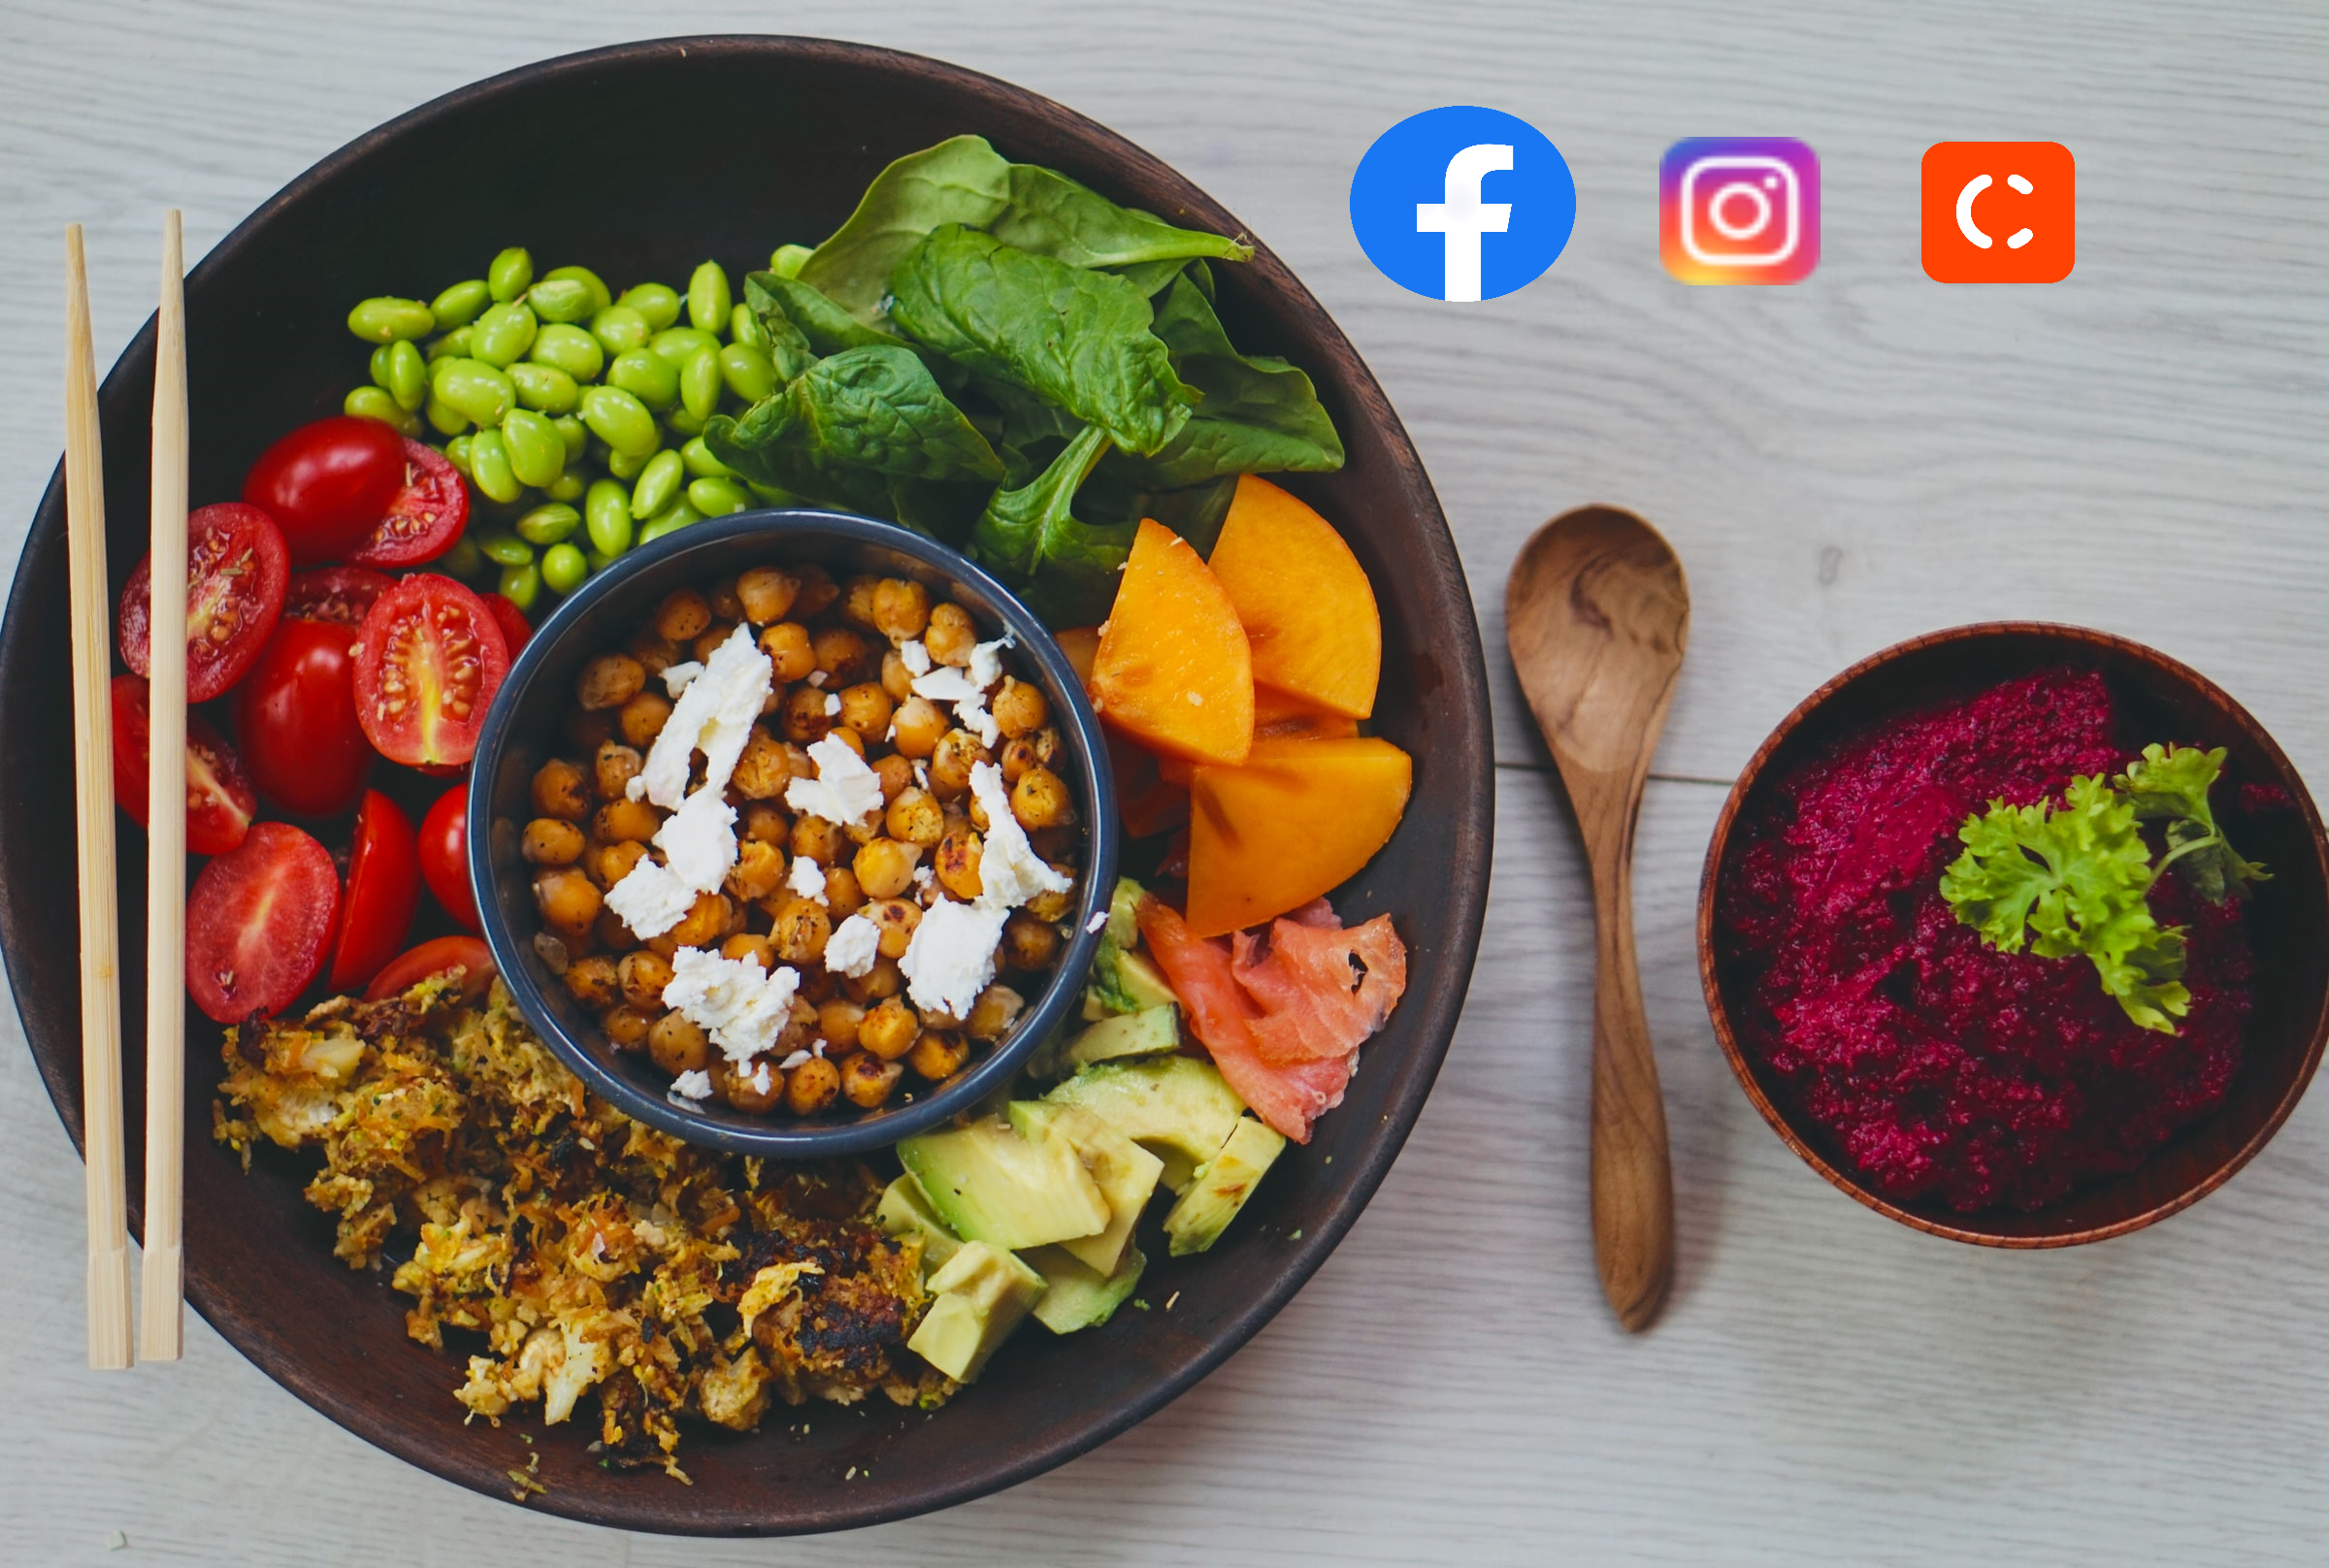 How you can leverage the power of social media to grow your restaurant business